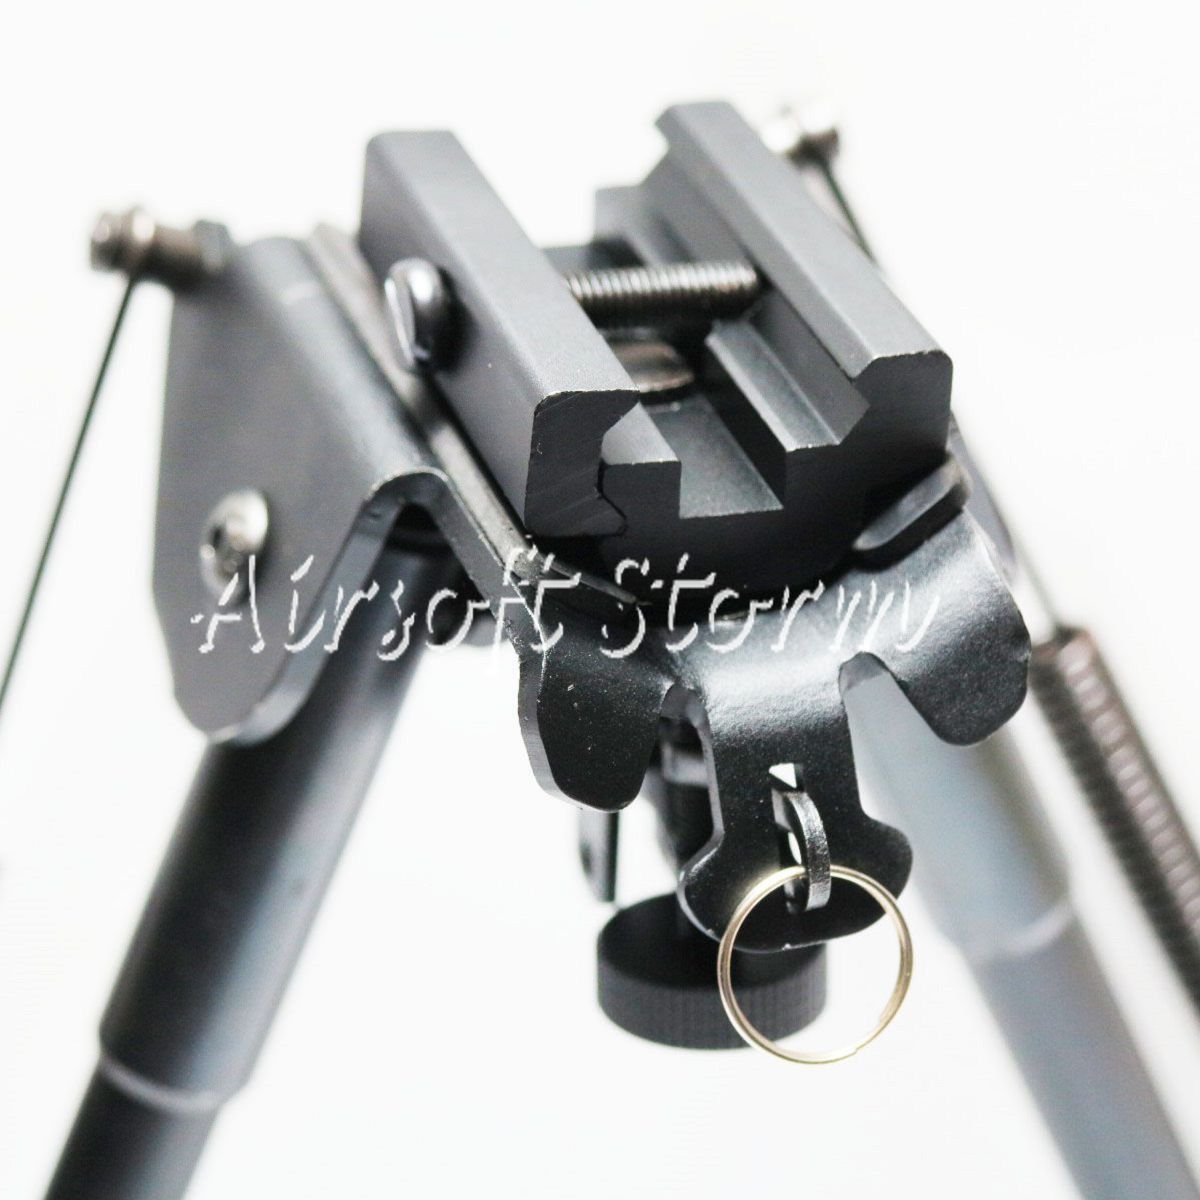 Shooting Gear Spring Eject Rest Rifle Airsoft 9"-15" Shooter Bipod